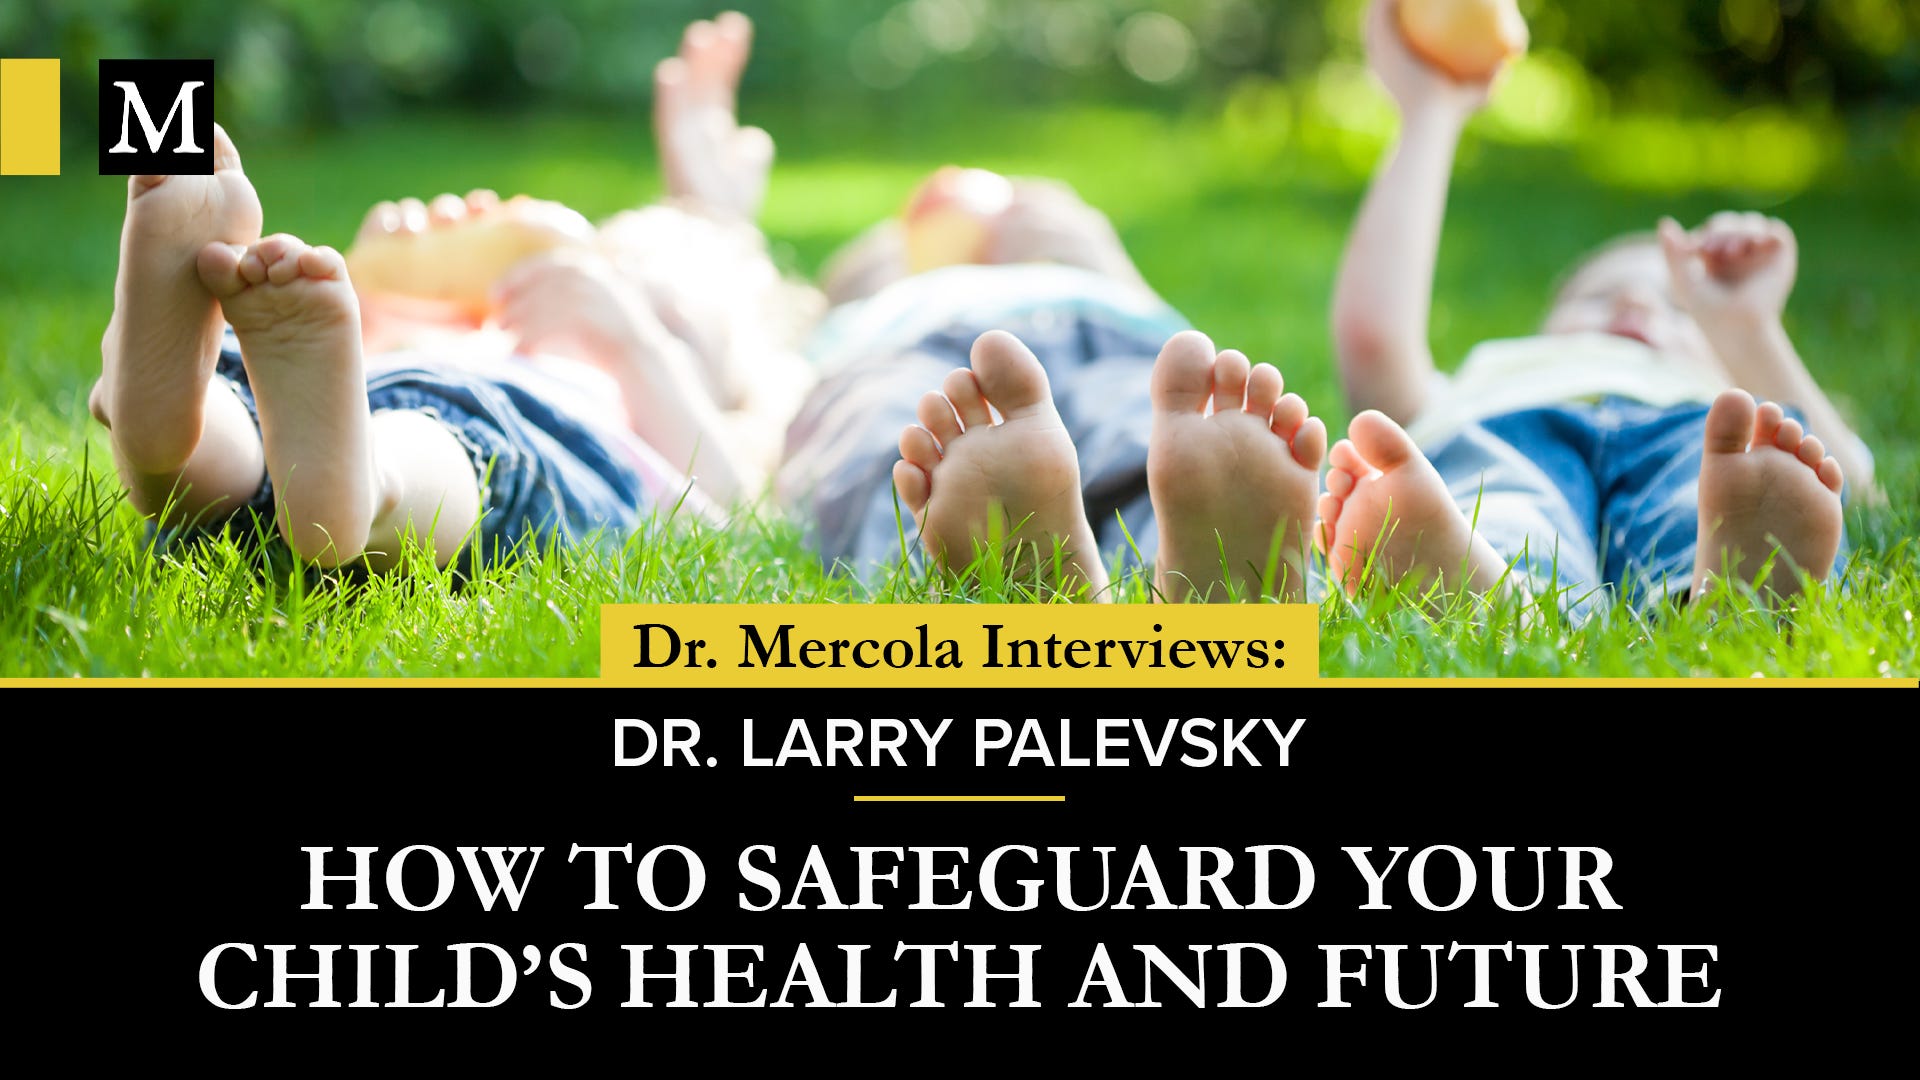 How to Safeguard Your Child’s Health and Future - Discussion between Dr. Larry Palevsky & Dr. Mercola